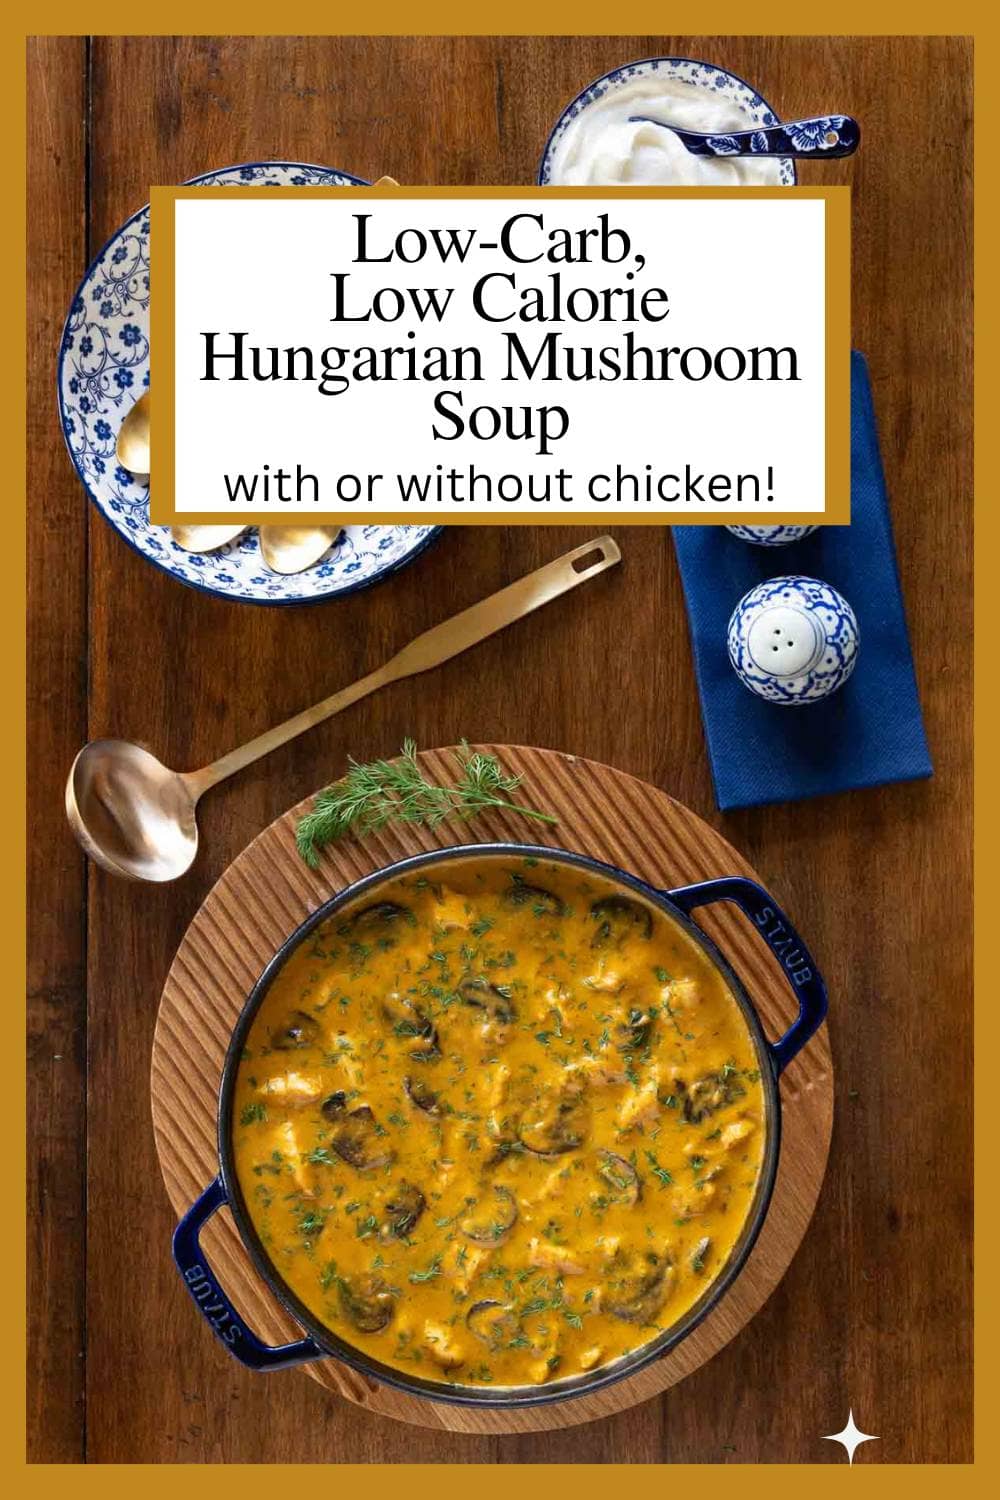 Low-Carb Hungarian Mushroom Soup (With or Without Chicken)